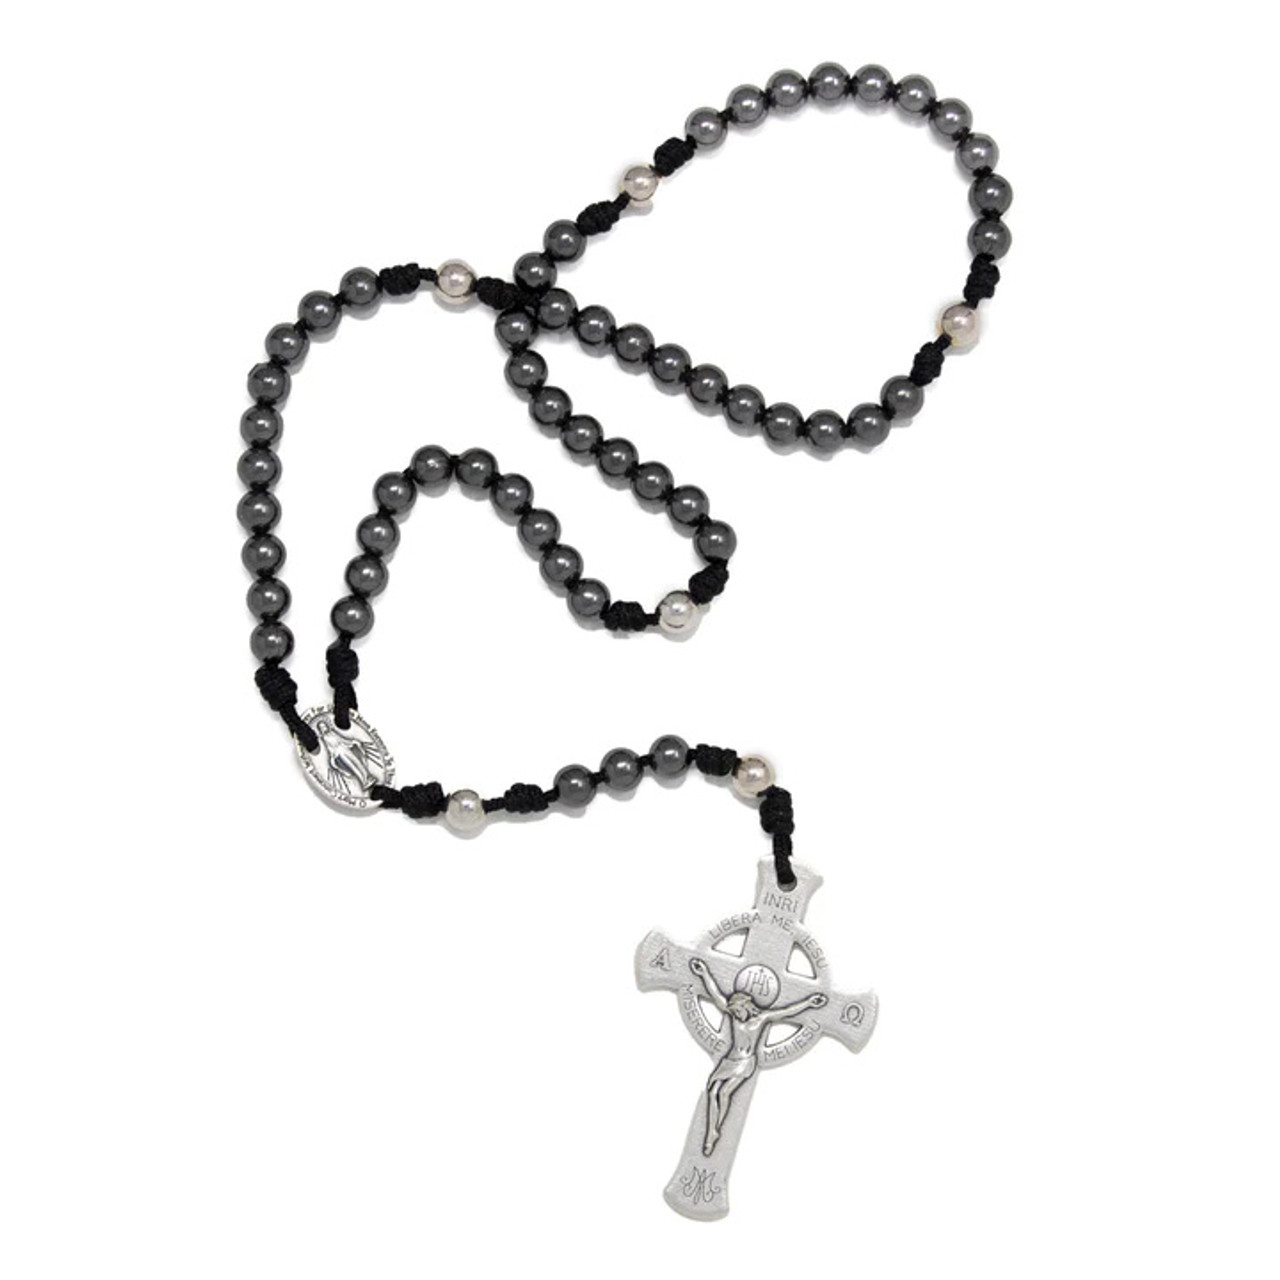 rosary moon Back Cross All-in-one カスタム販売 - rotary4560.org.br